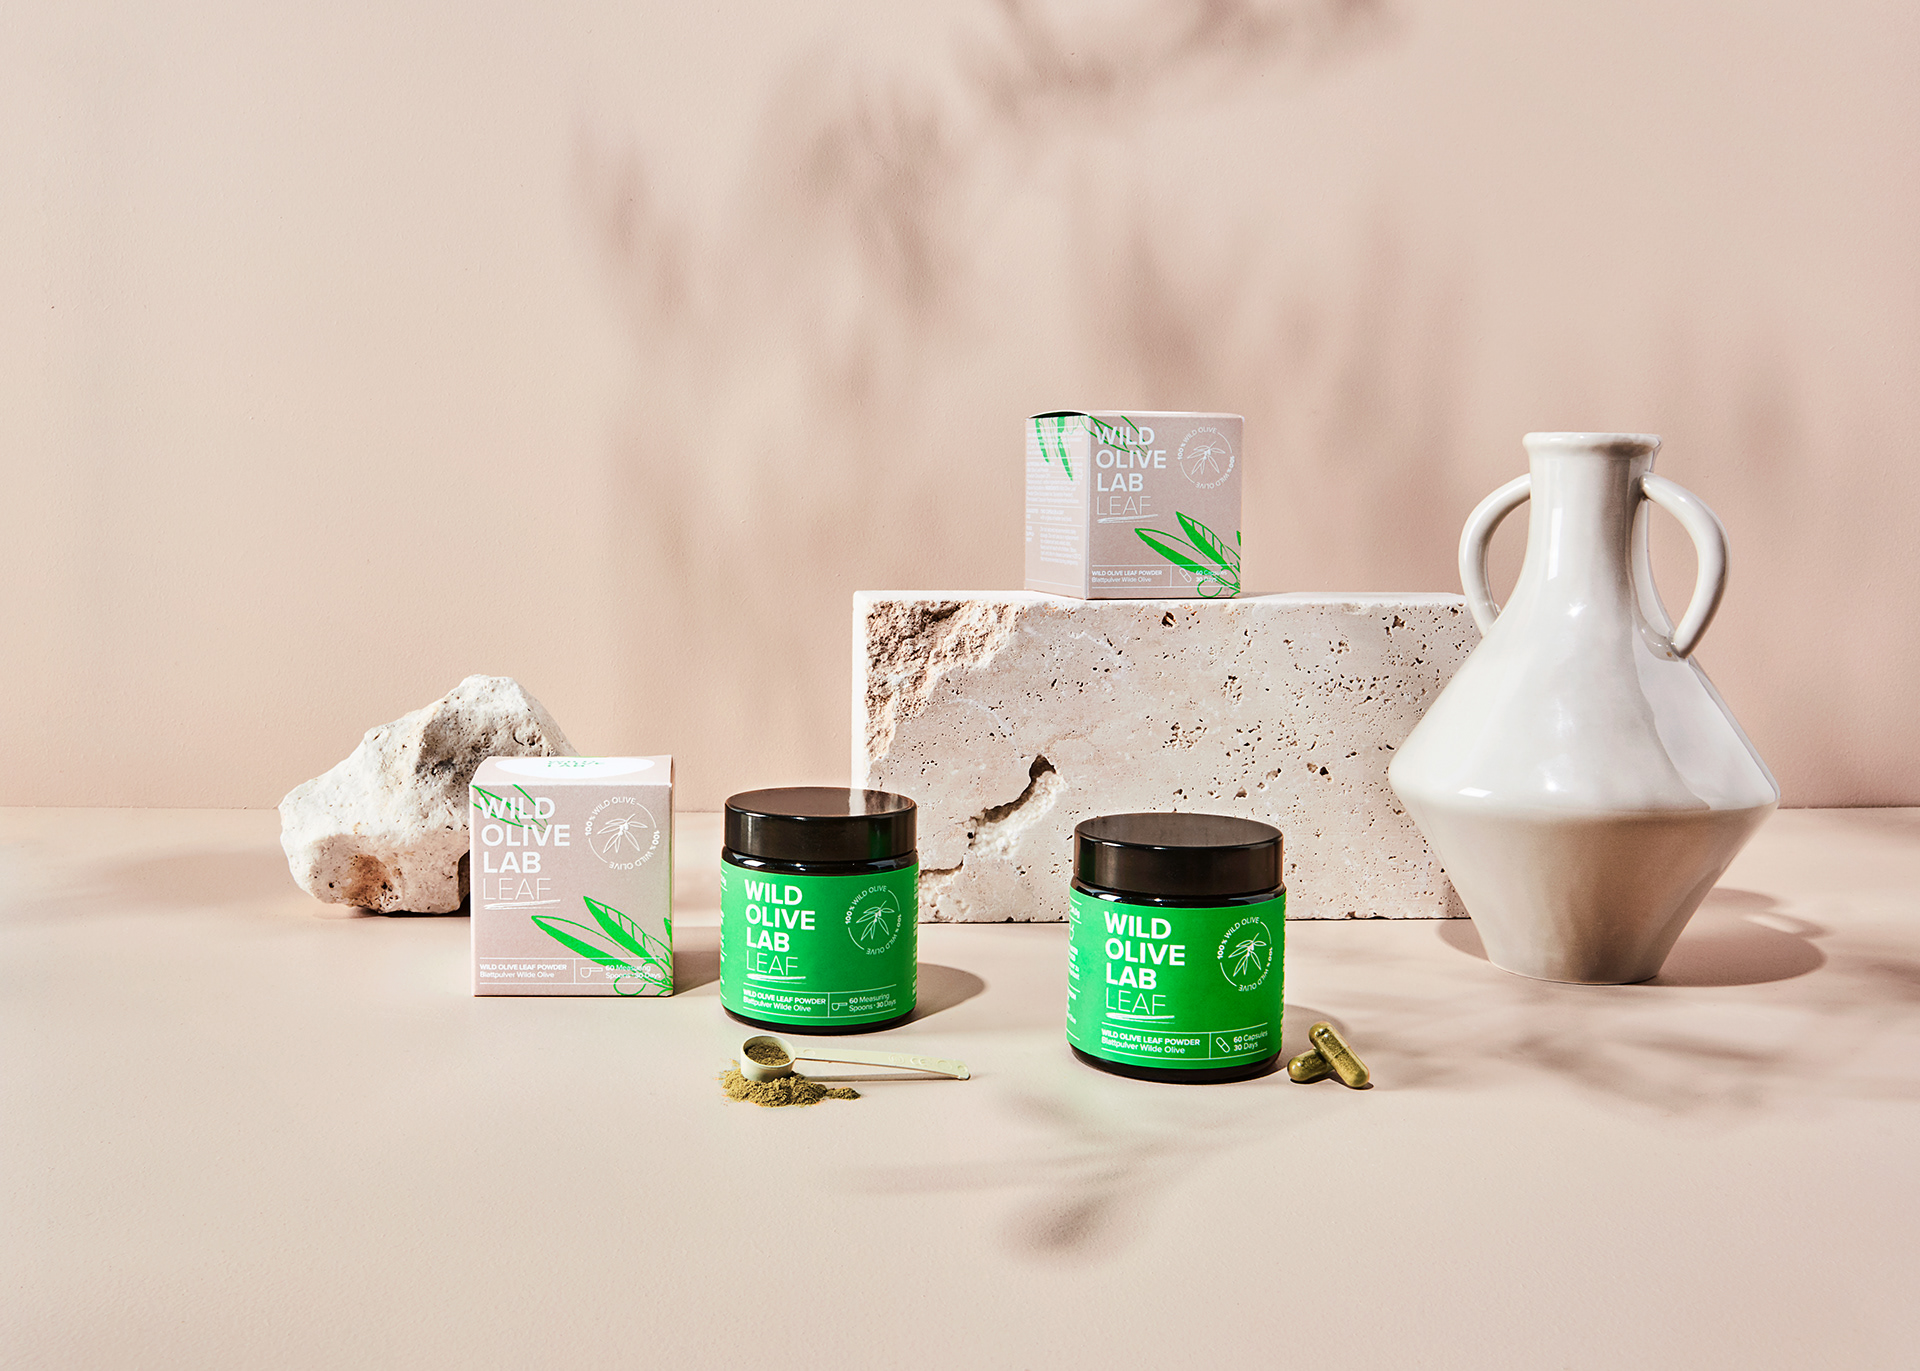 Branding and Packaging for Wild Olive Lab by Design Studio B.O.B